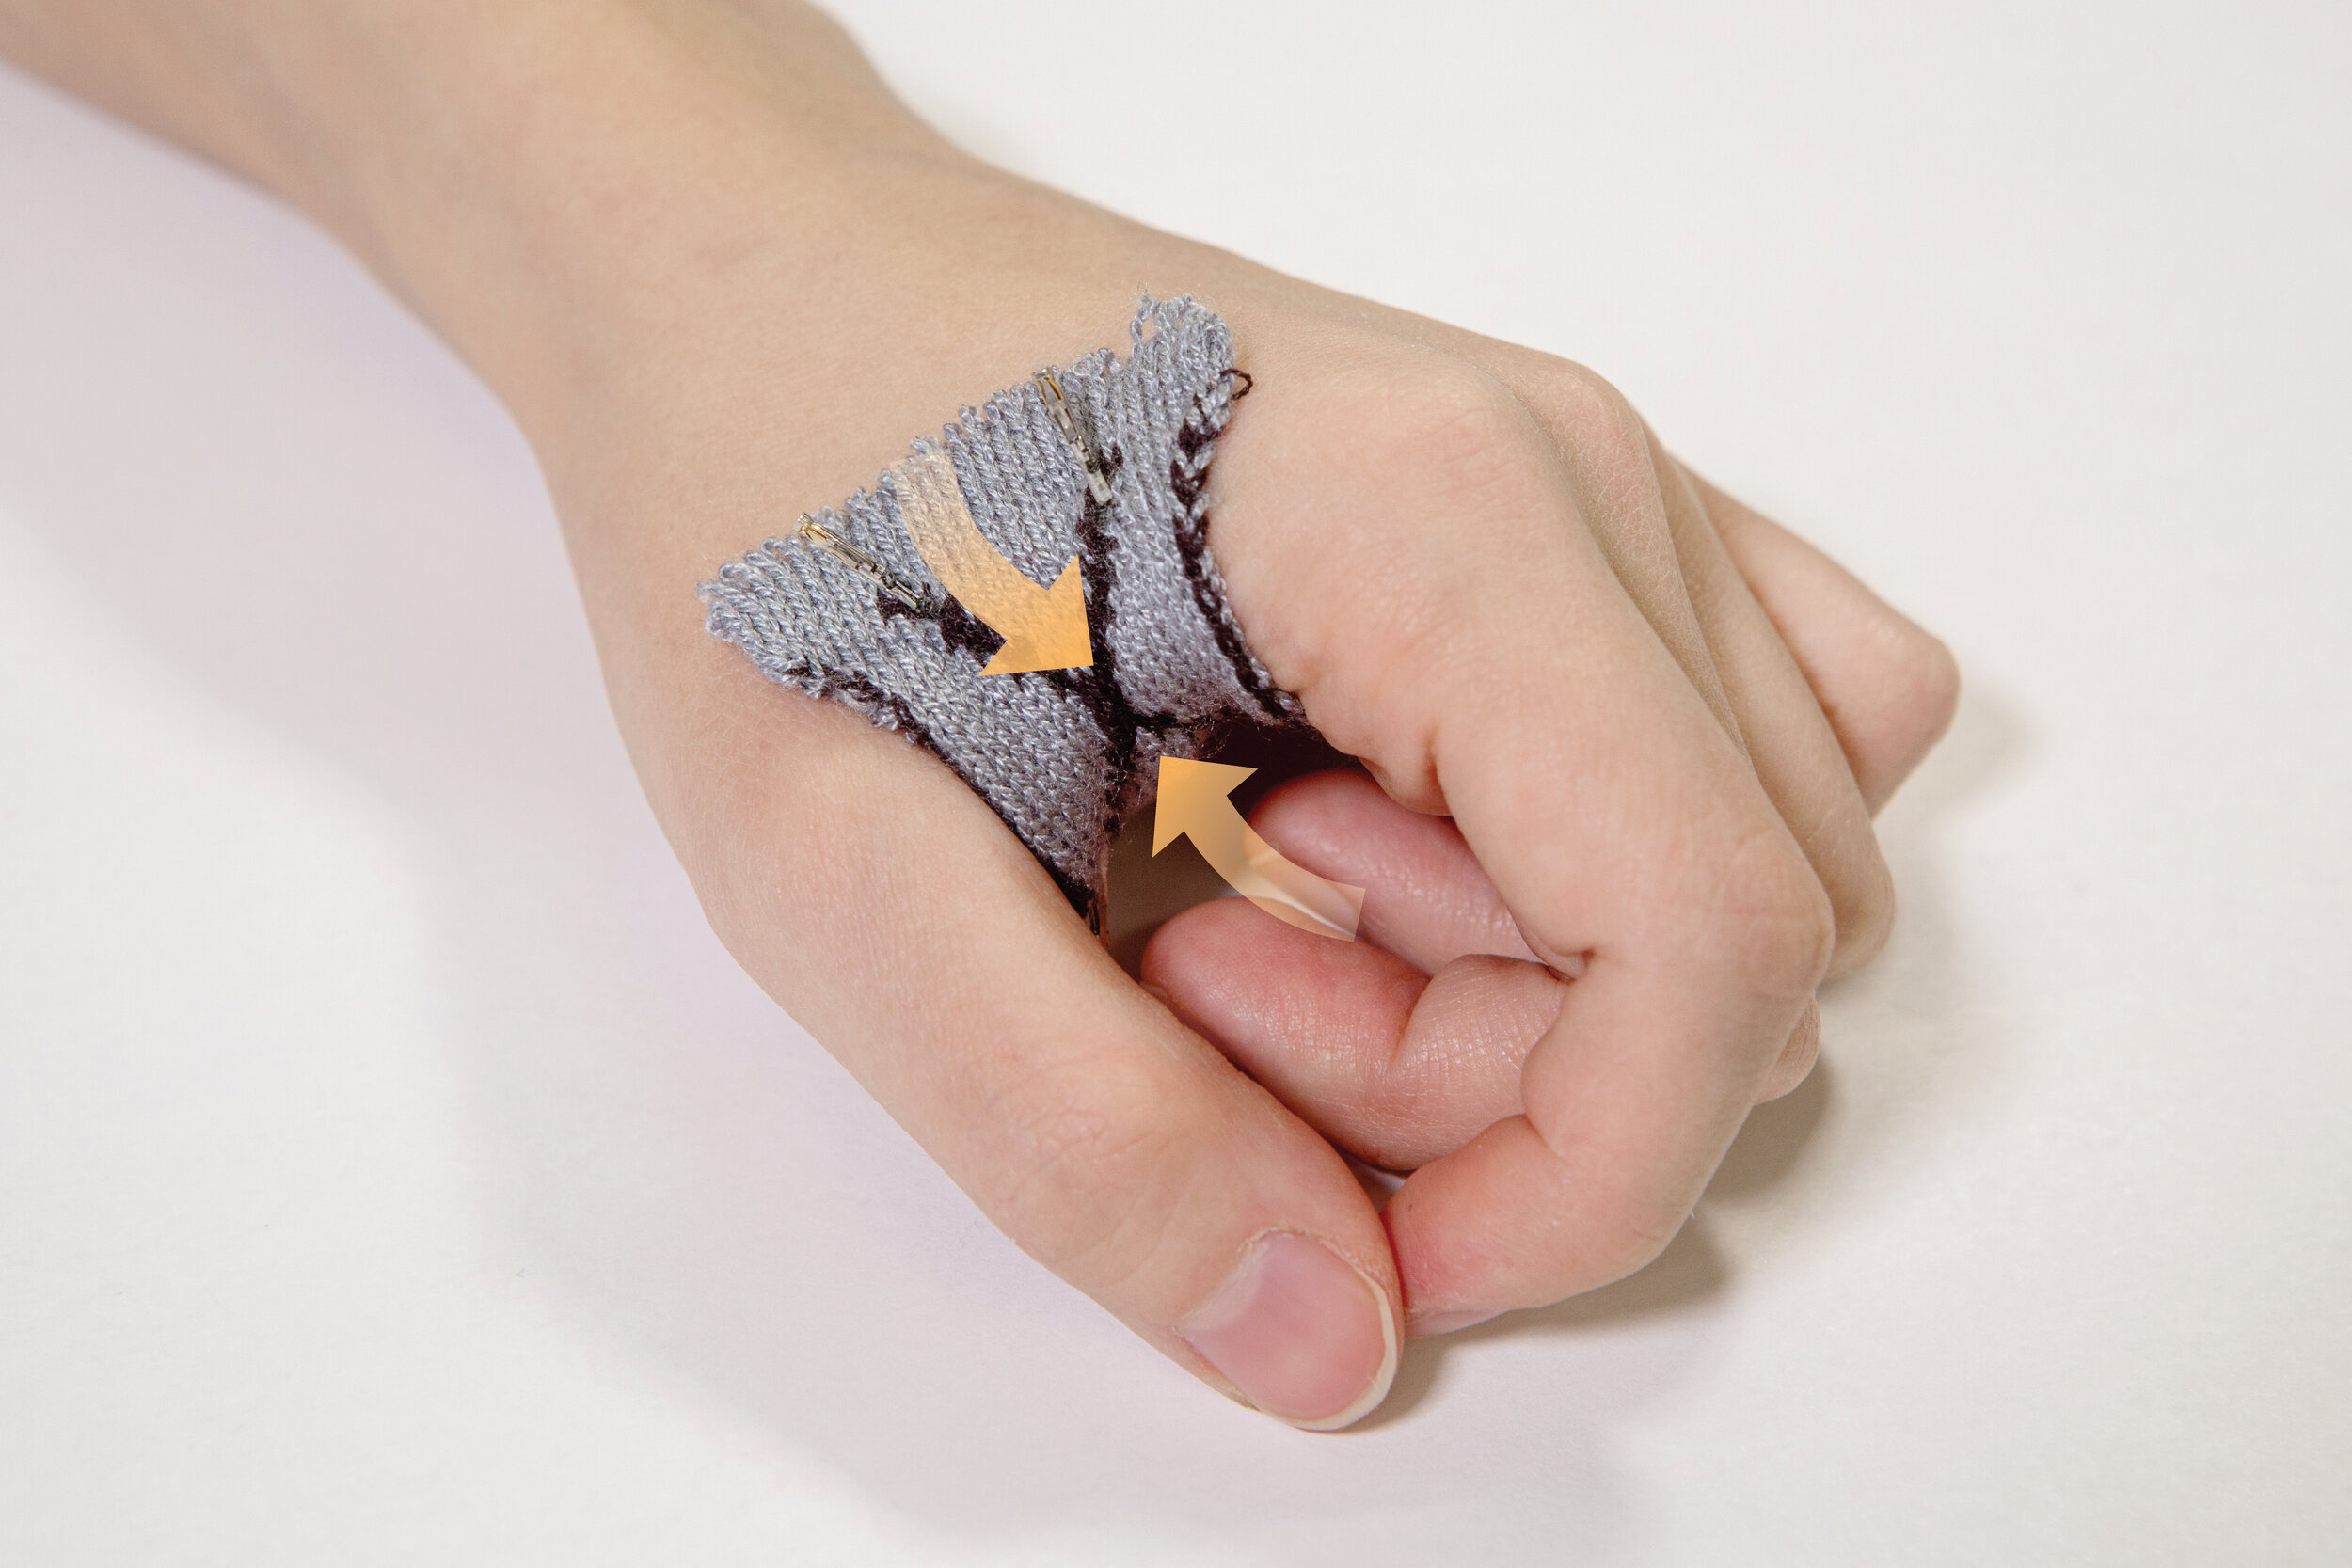  KnitDermis pinch interface during actuation while worn on the hand. (Image Credit: Hybrid Body Lab) (License:&nbsp;CC BY-NC-SA 4.0) 